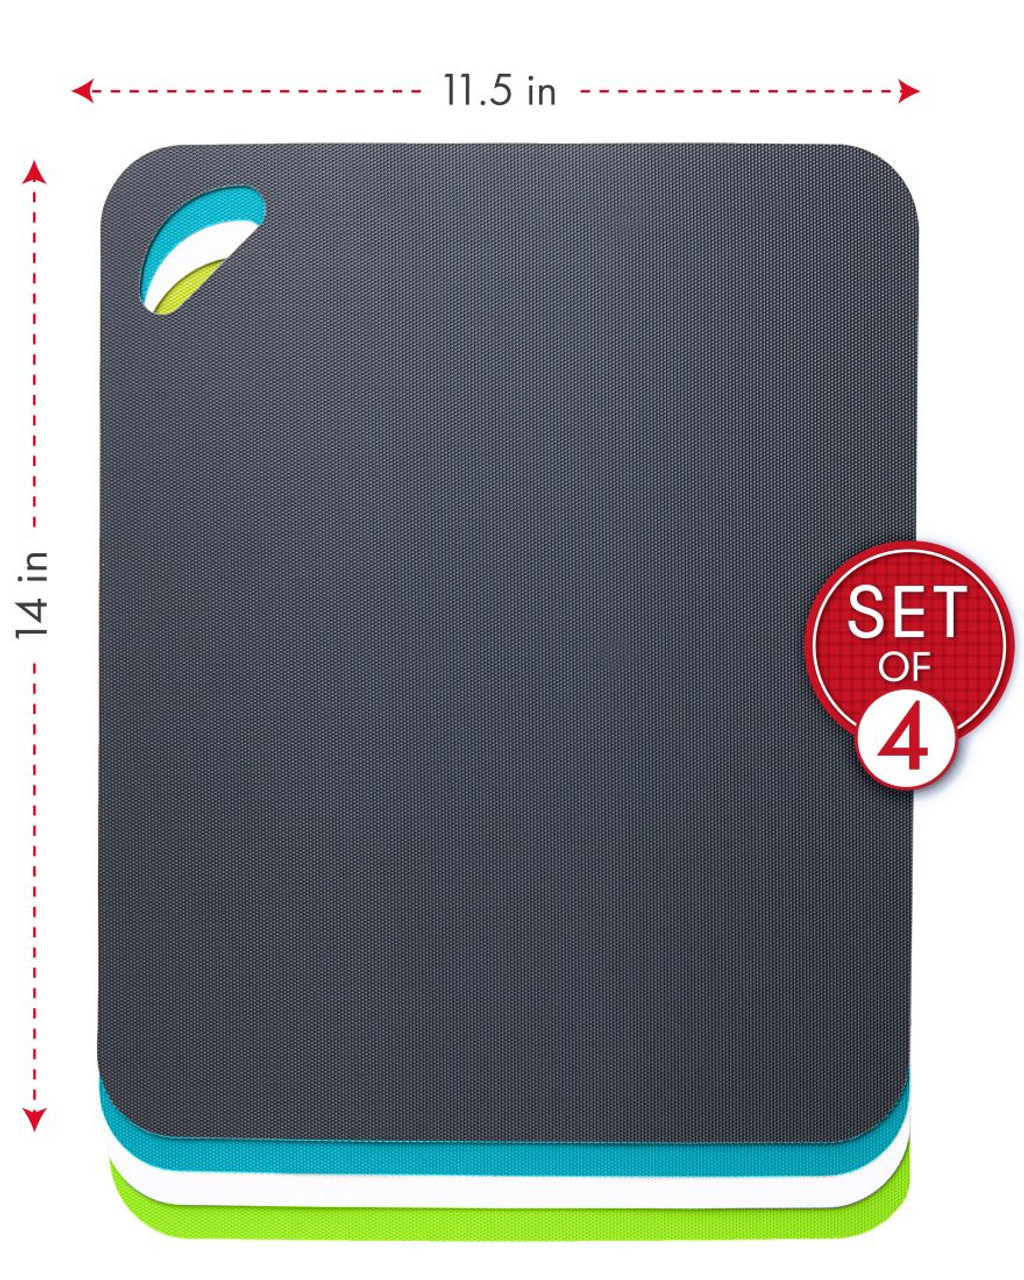 Grippmats® Flexible Cutting Mats Set includes 4 different colors  Gray, Turquoise, White & Green nicely sized 11.5"x14"x0.1